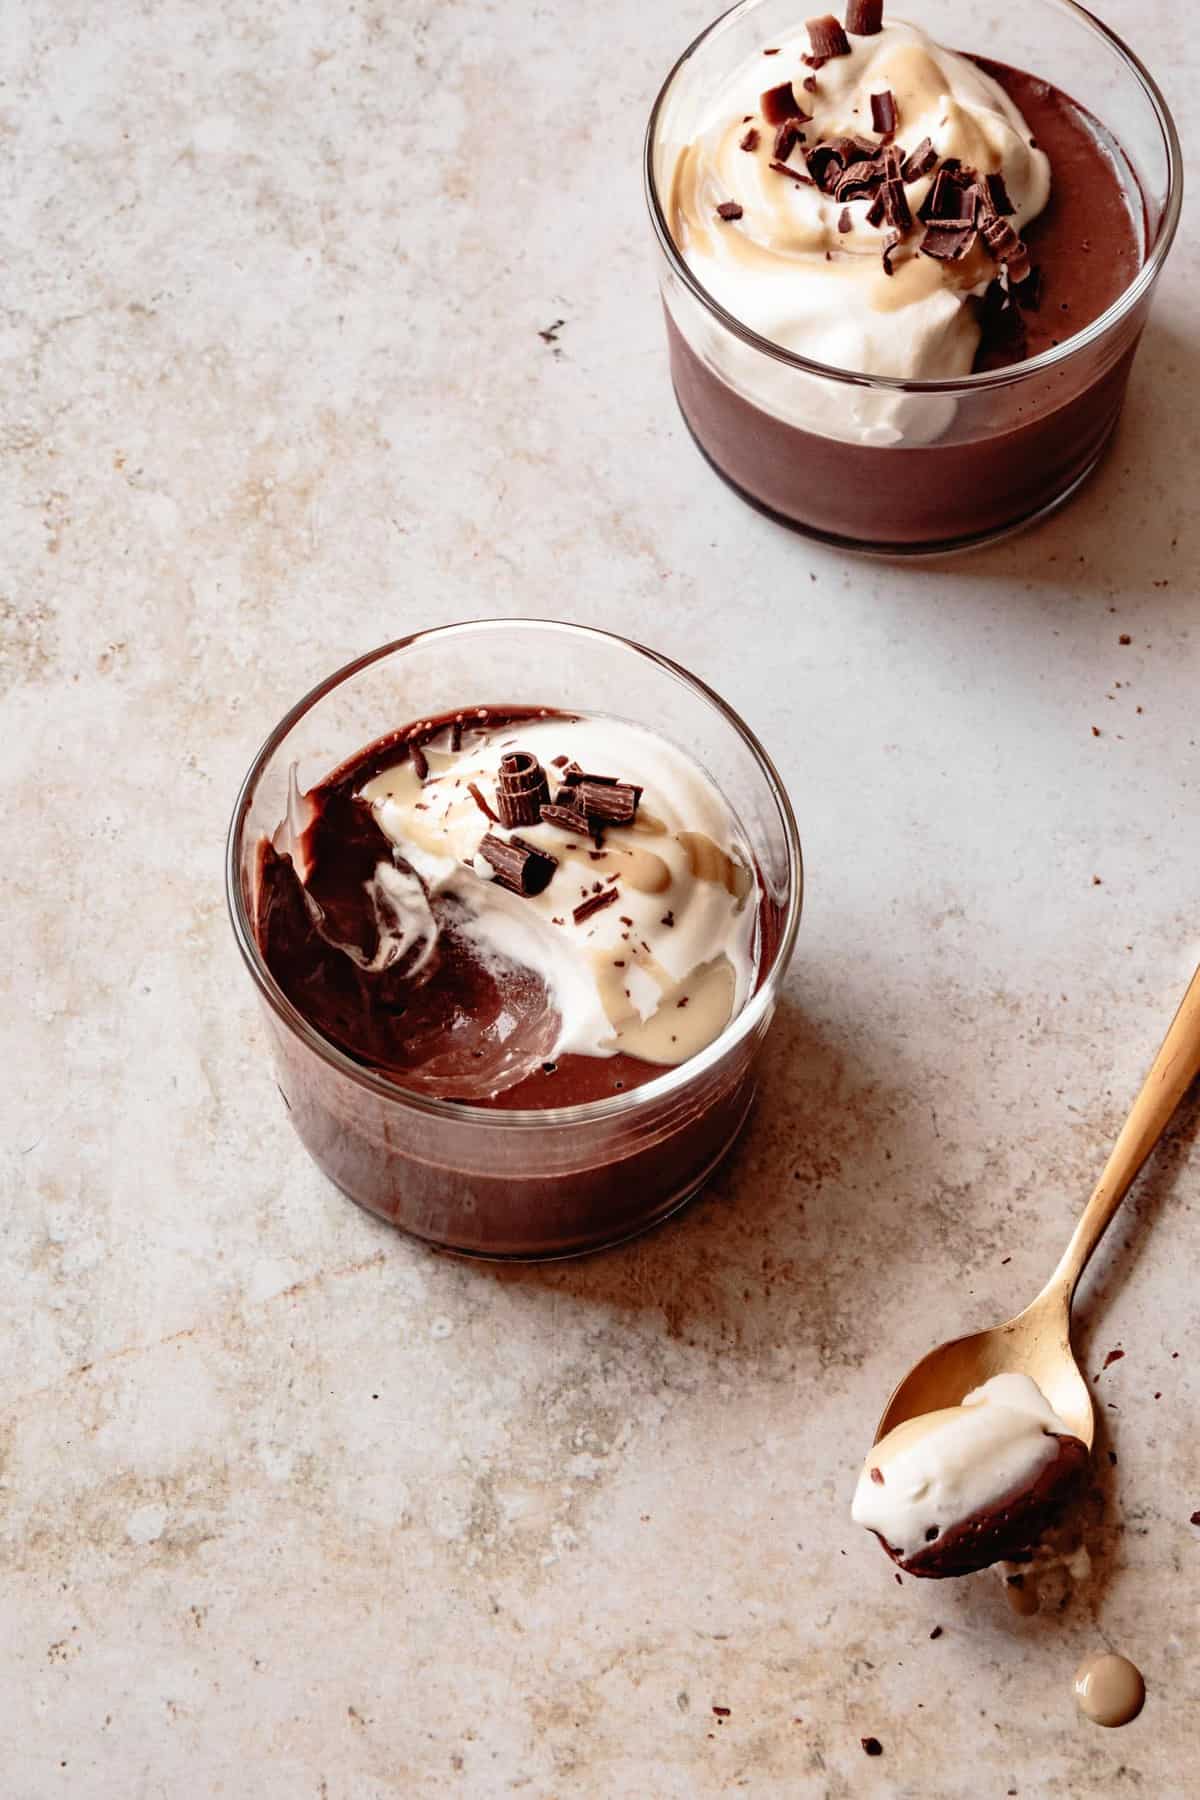 two glasses of vegan chocolate pudding on a surface with a spoonful taken out